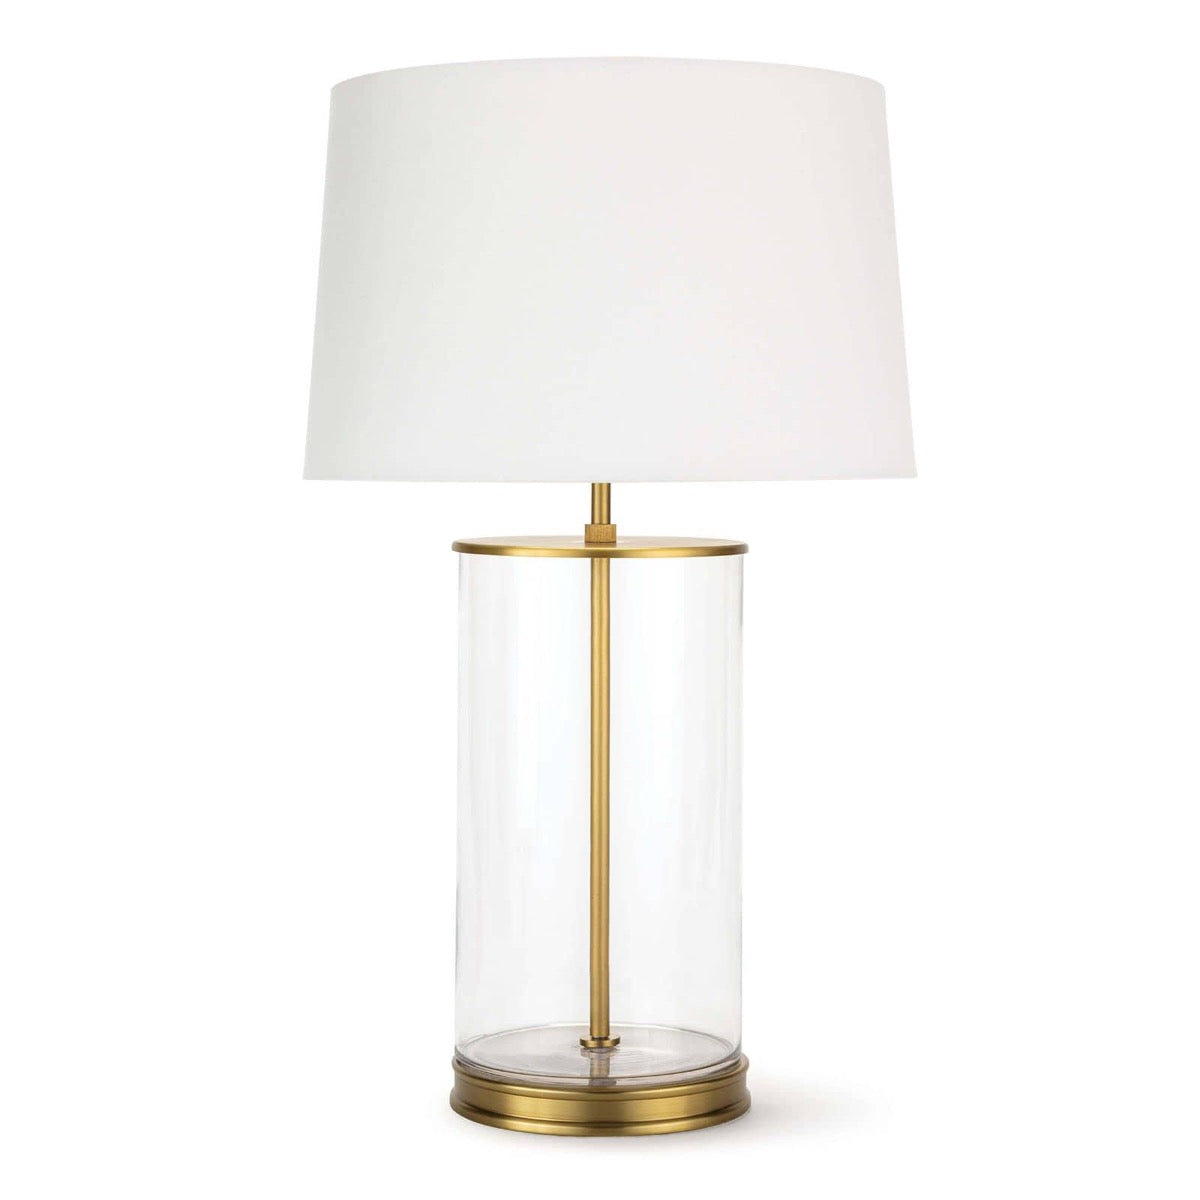 Magelian Glass Table Lamp Natural Brass. Front view. 